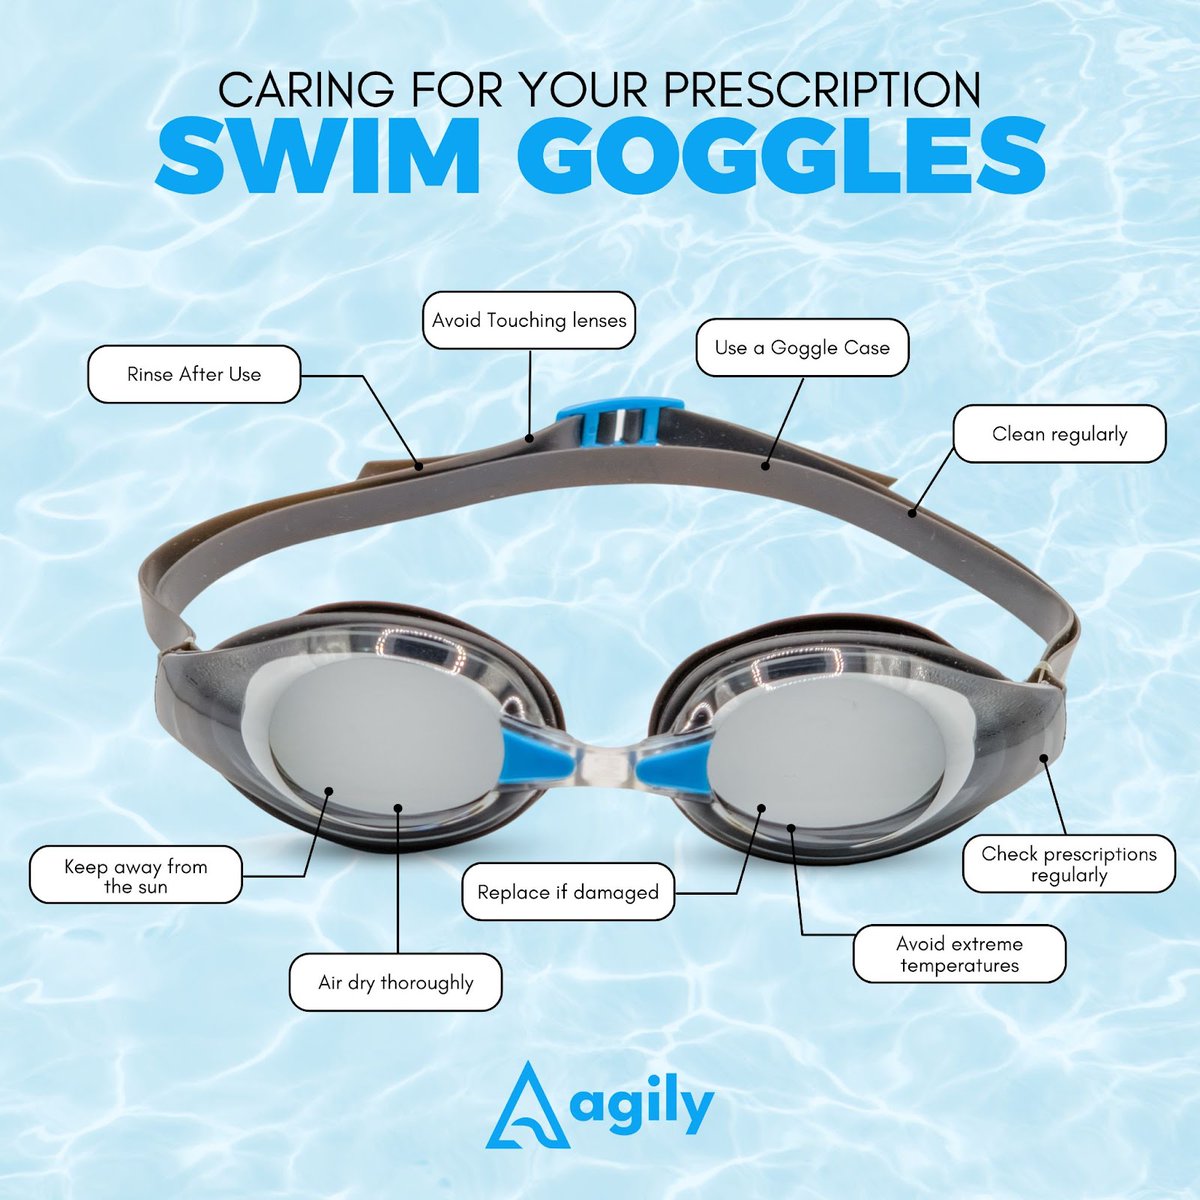 Crystal-clear swims start with proper care. Keep your prescription swim goggles pristine for perfect vision and endless laps.

Click to read more.
agily.ch/blogs/agily-bl…
.
#swimgoggles #swimminggear #clearvision #eyeprotection